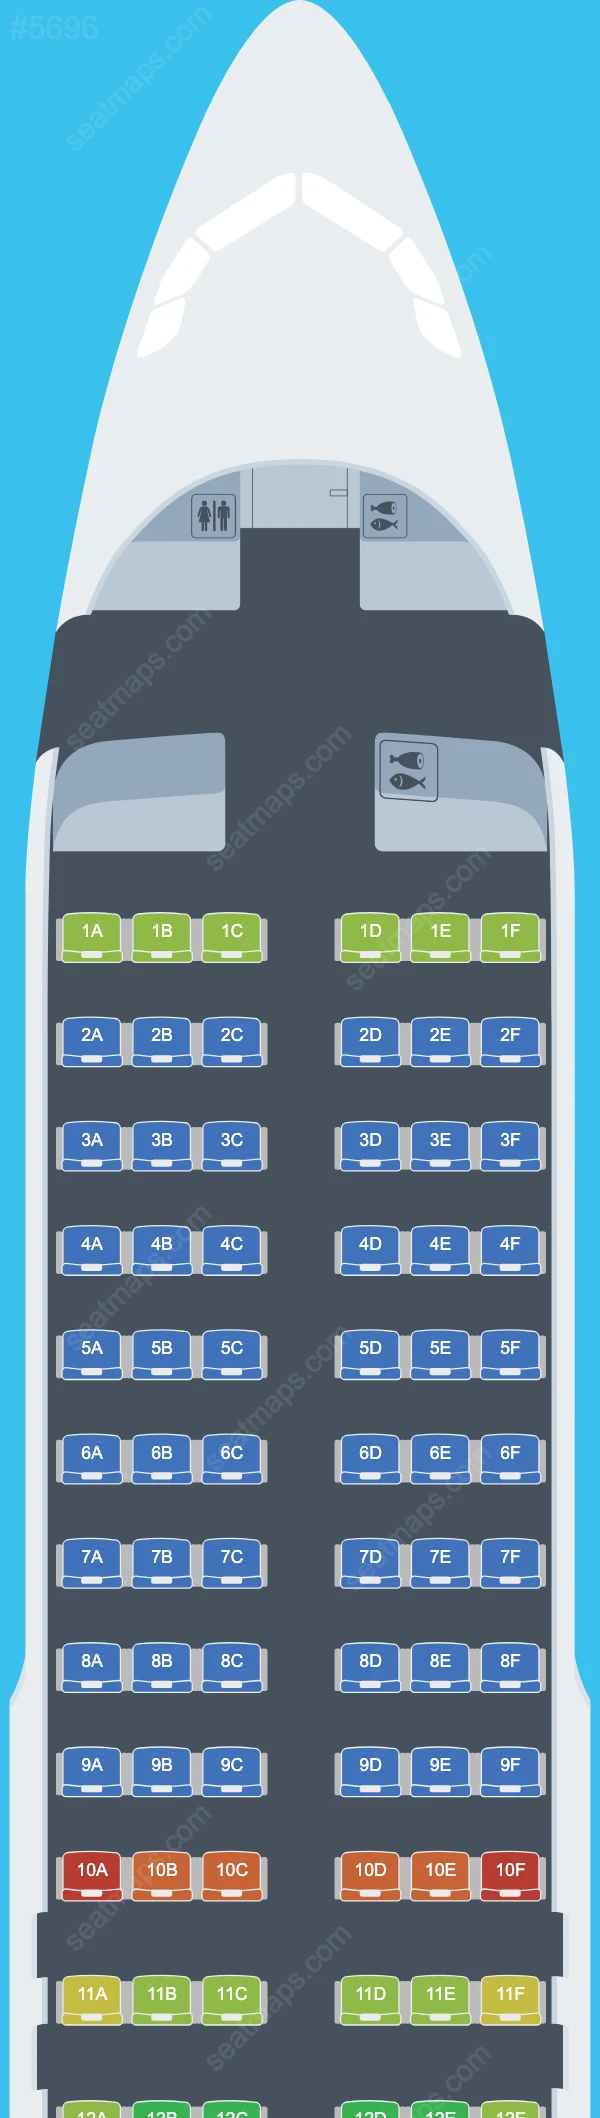 Brussels Airlines Airbus A320 Seat Maps A320-200